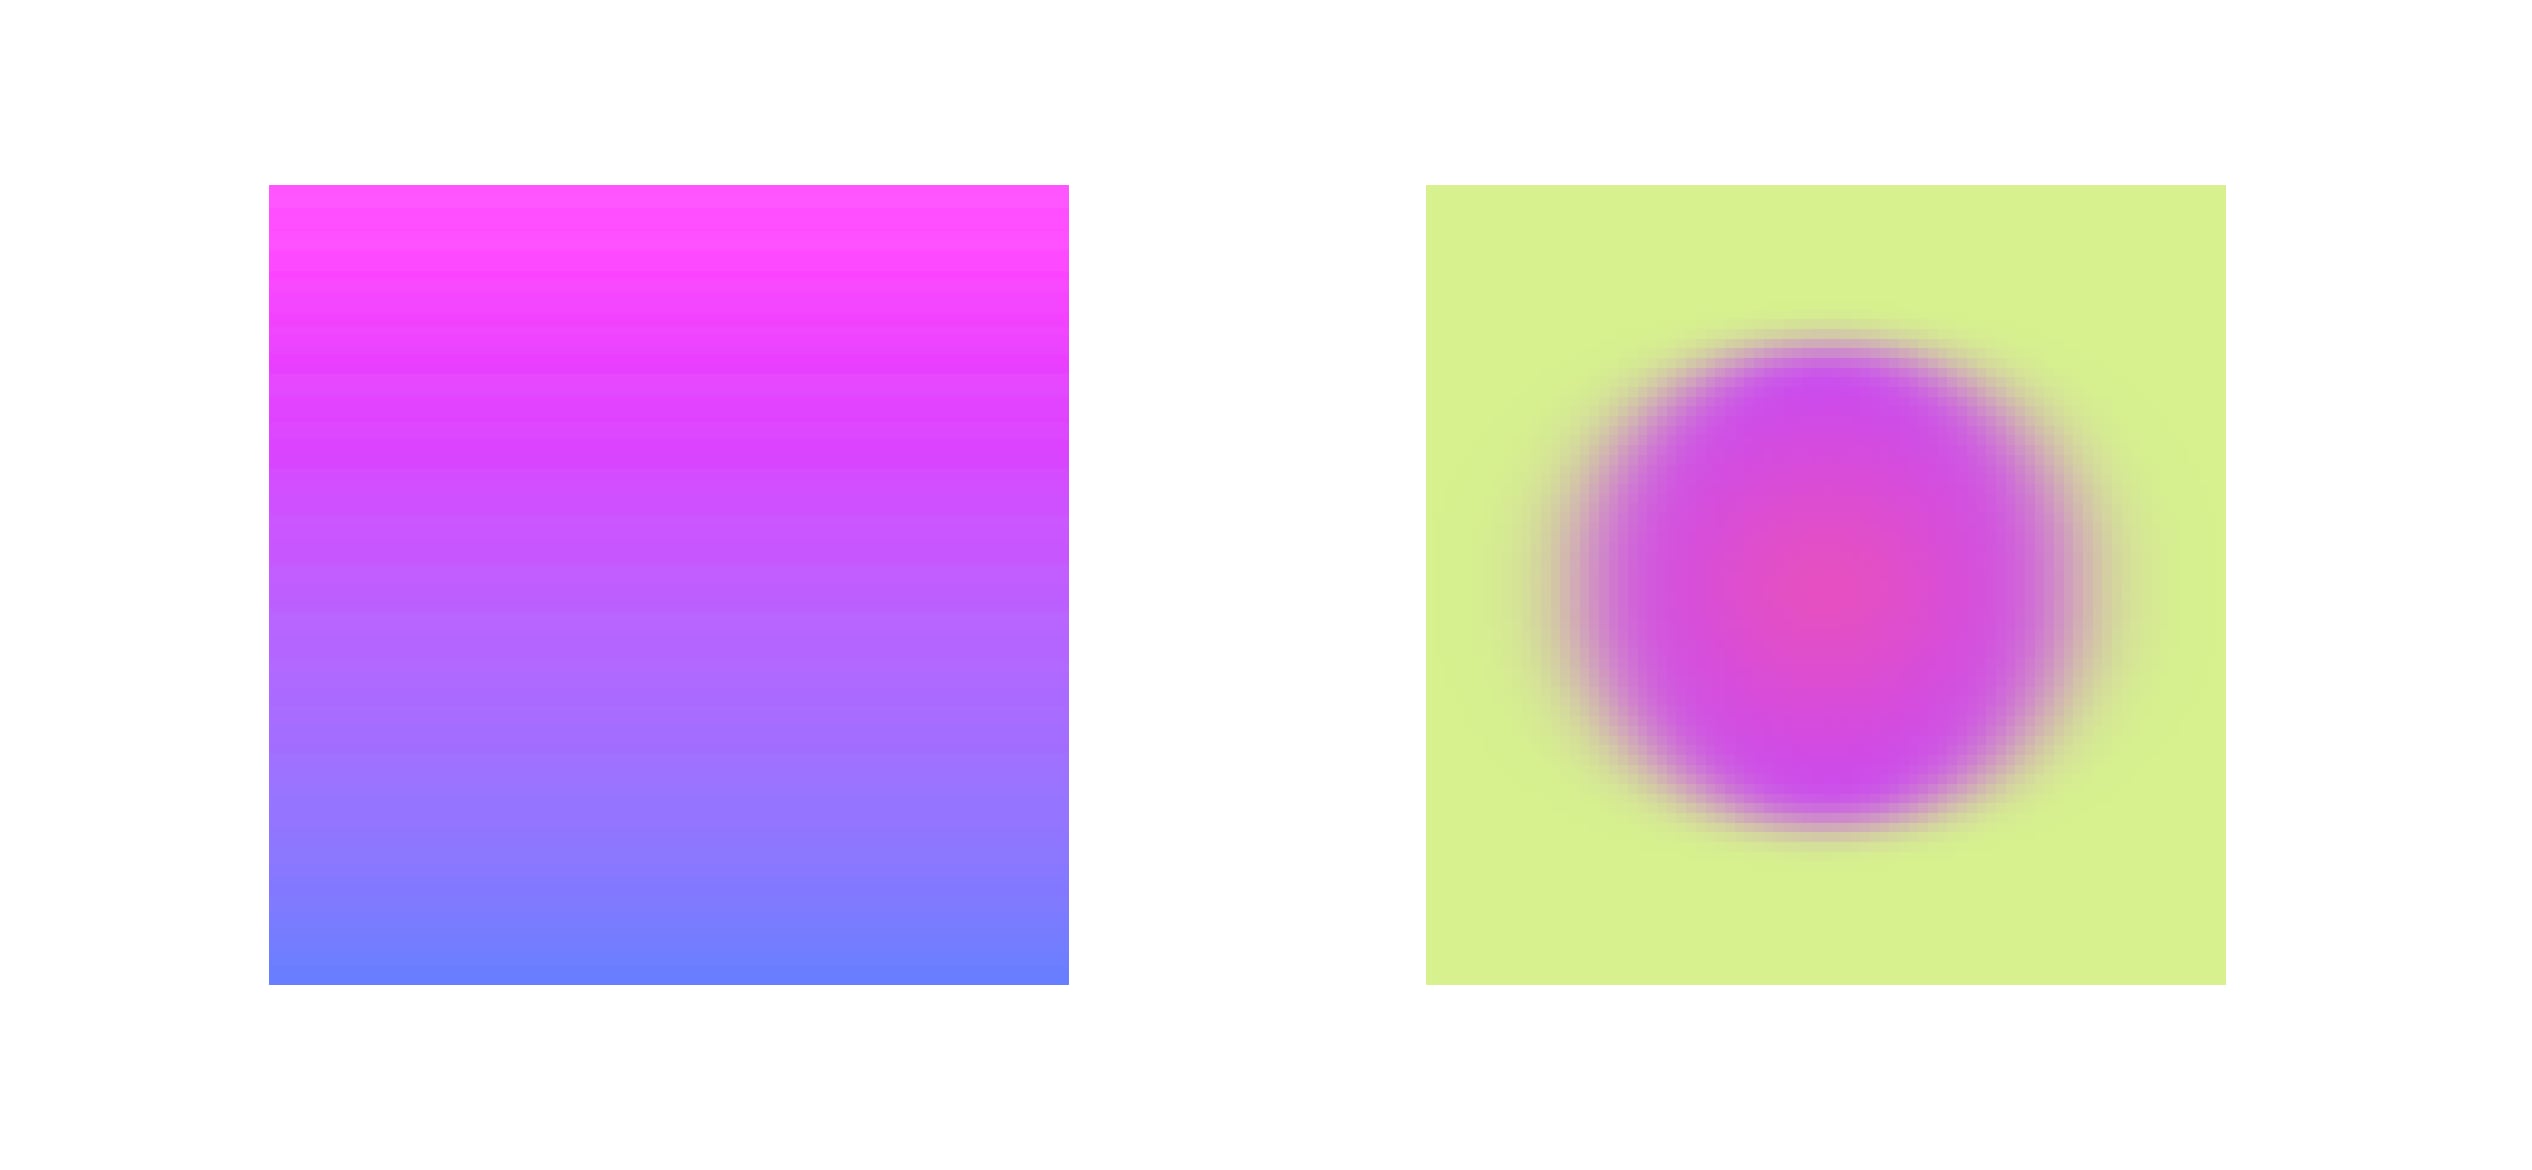 Banding and pixelation. Banding means there's no smooth transition between a gradient, pixelation means blocks instead of smooth lines